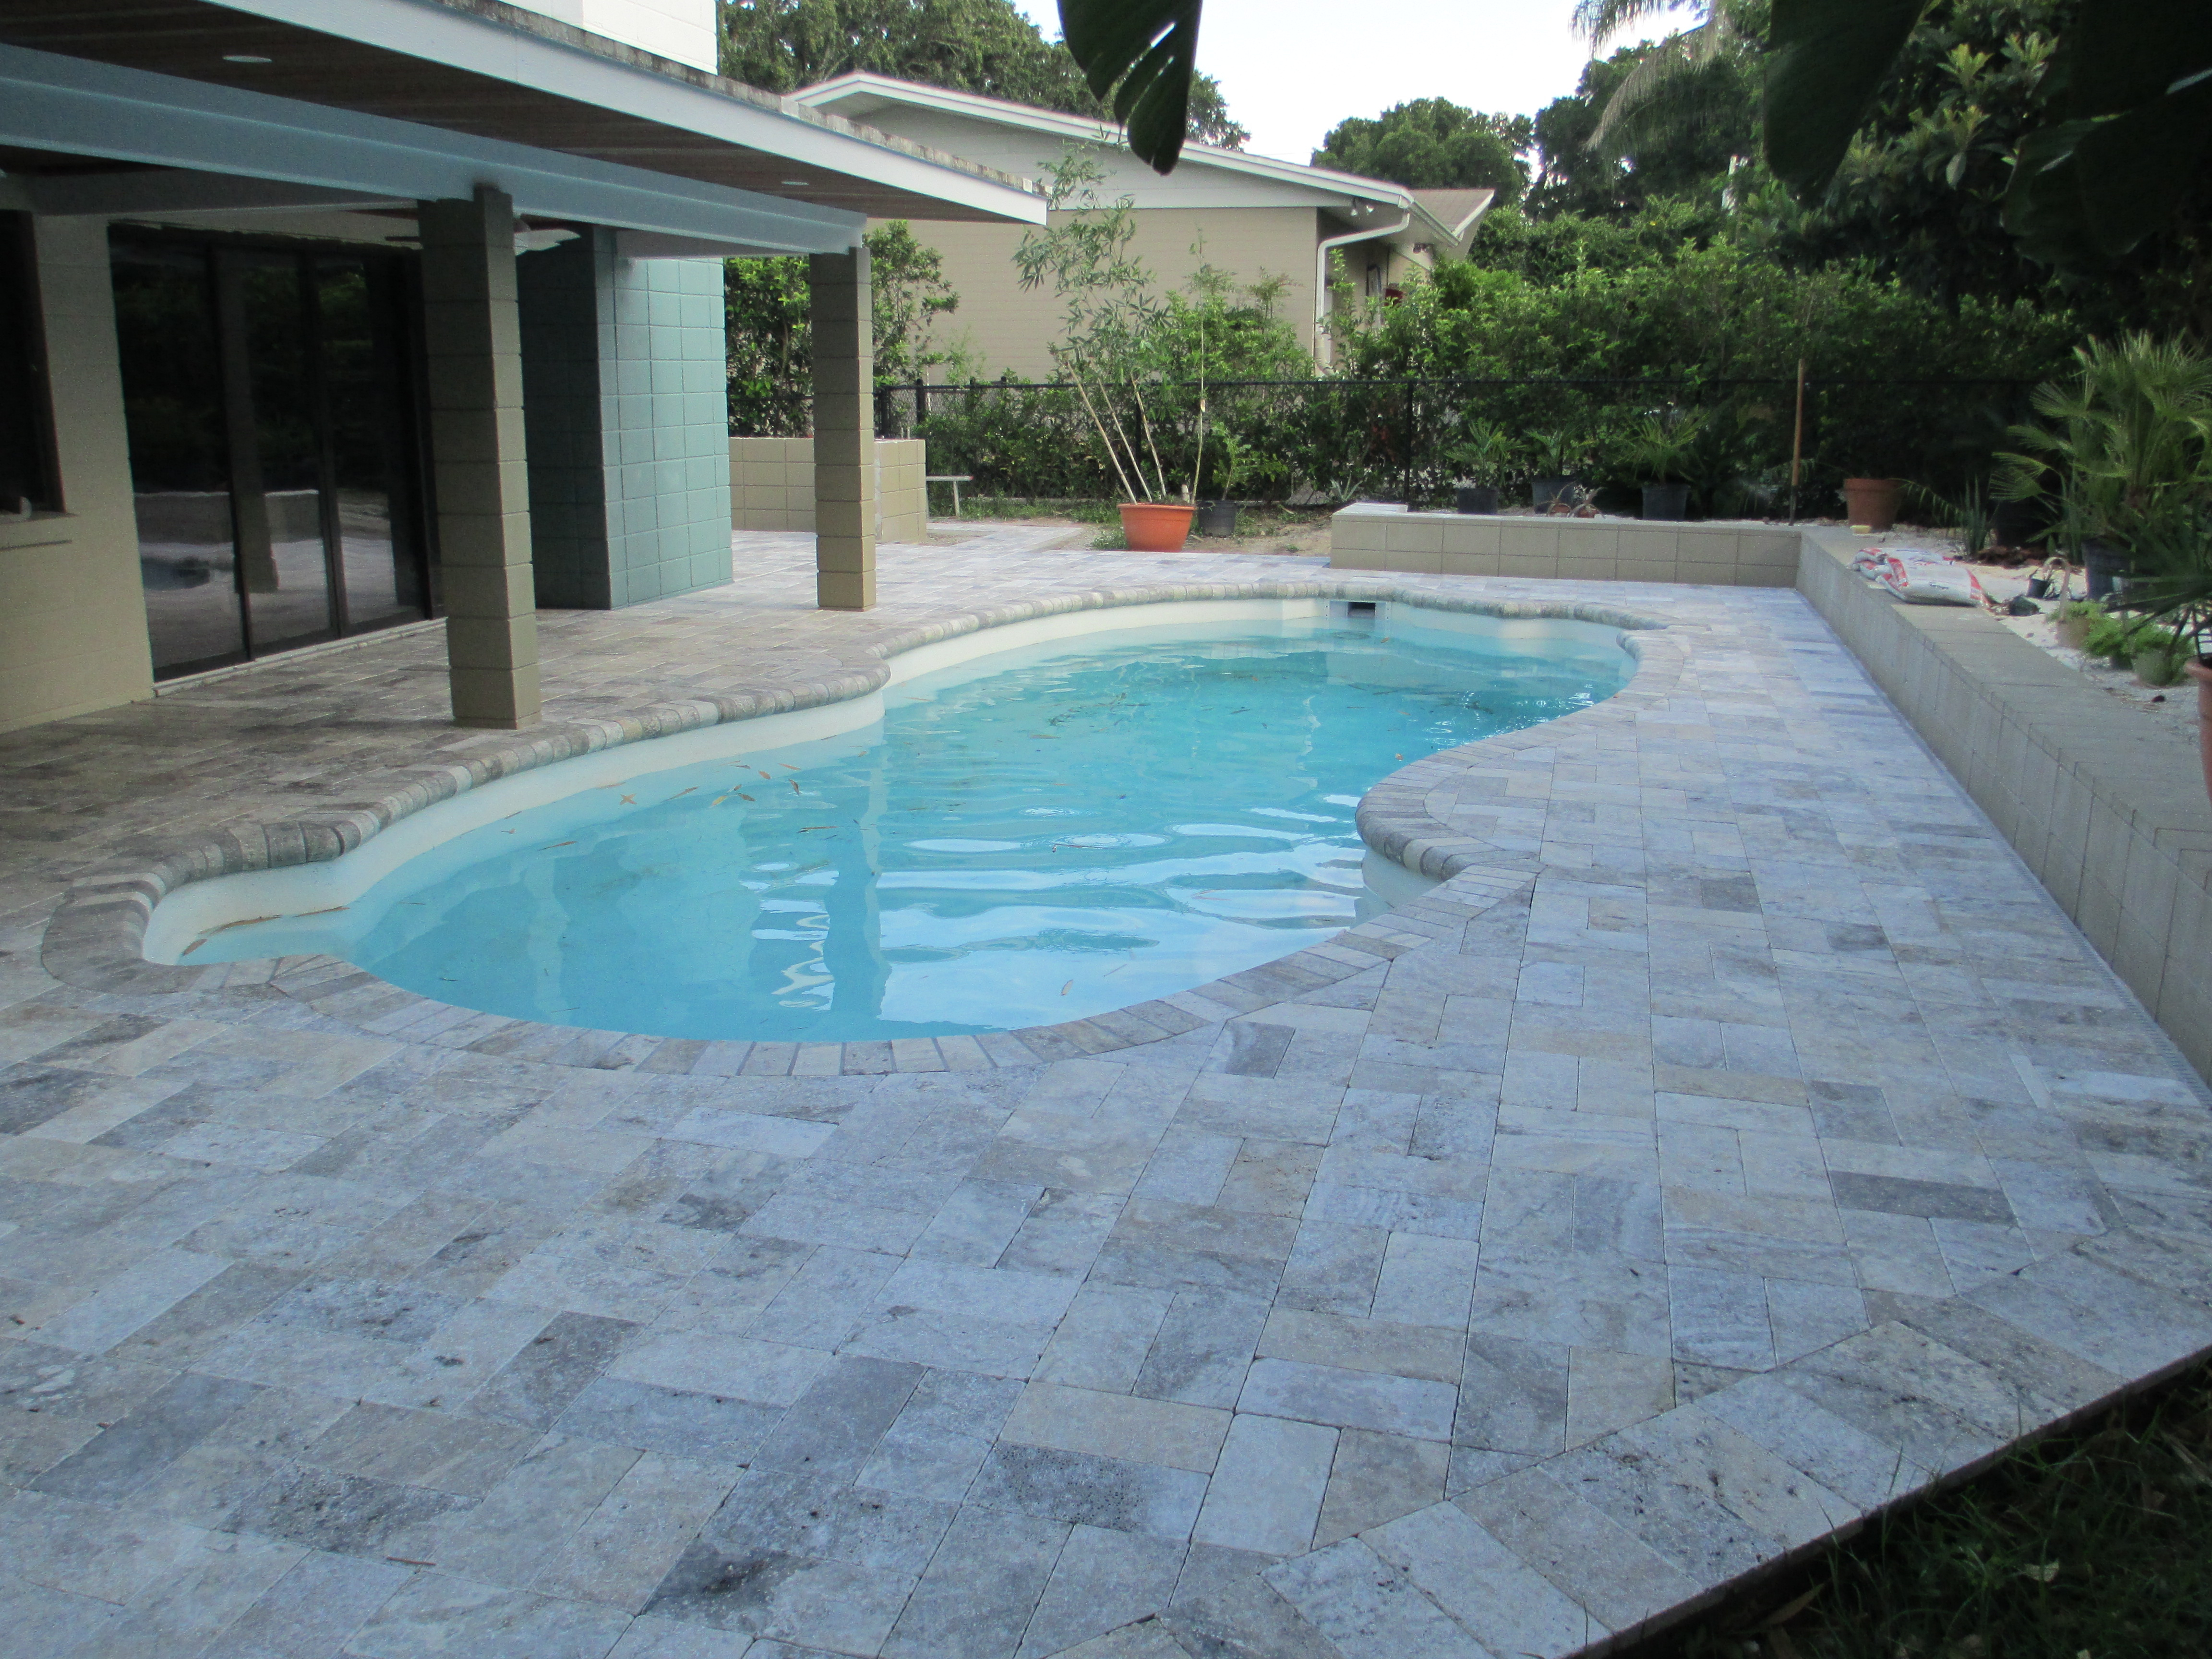 Travertine Pavers This Tips For Pool Deck Pavers This Tips For pertaining to dimensions 4608 X 3456